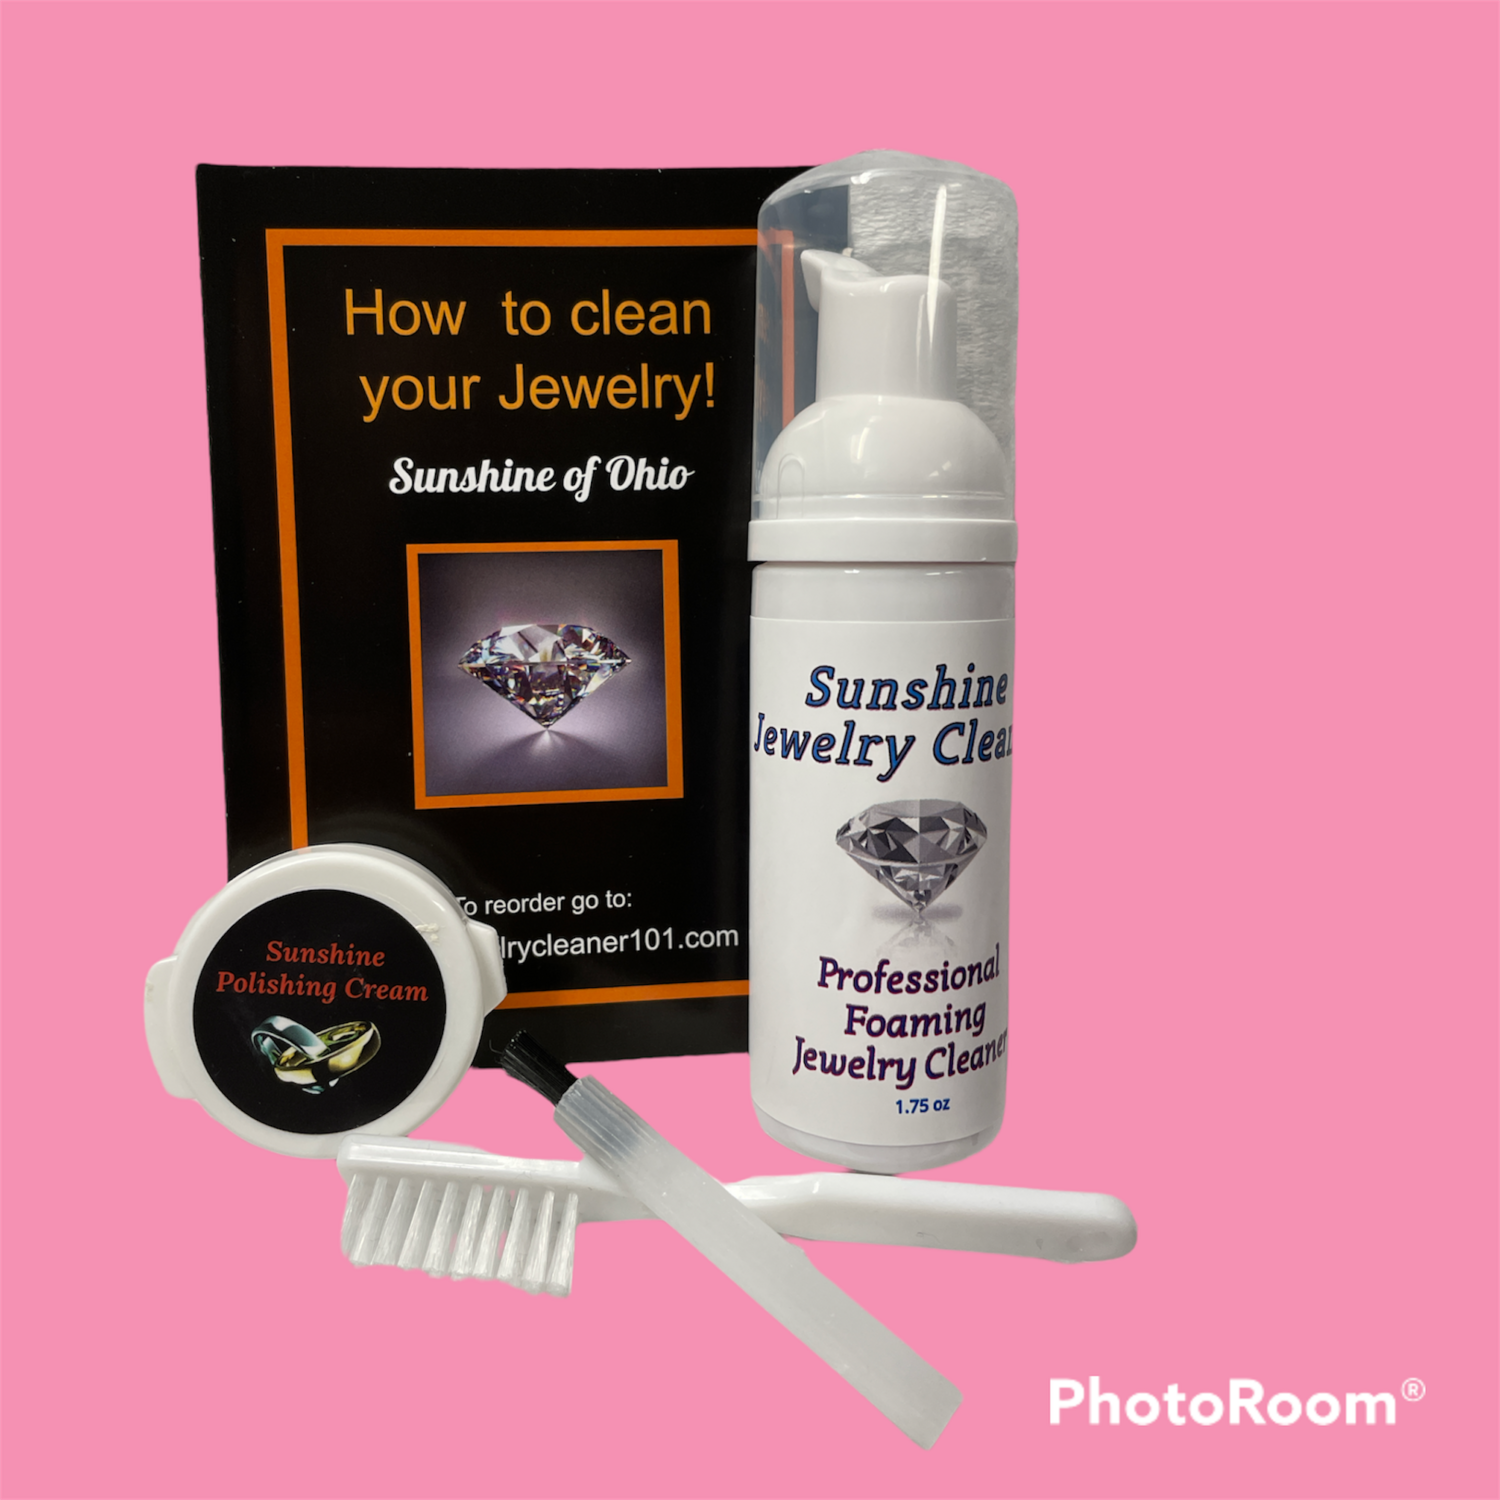 Wholesale, Jewelry Cleaning Kit